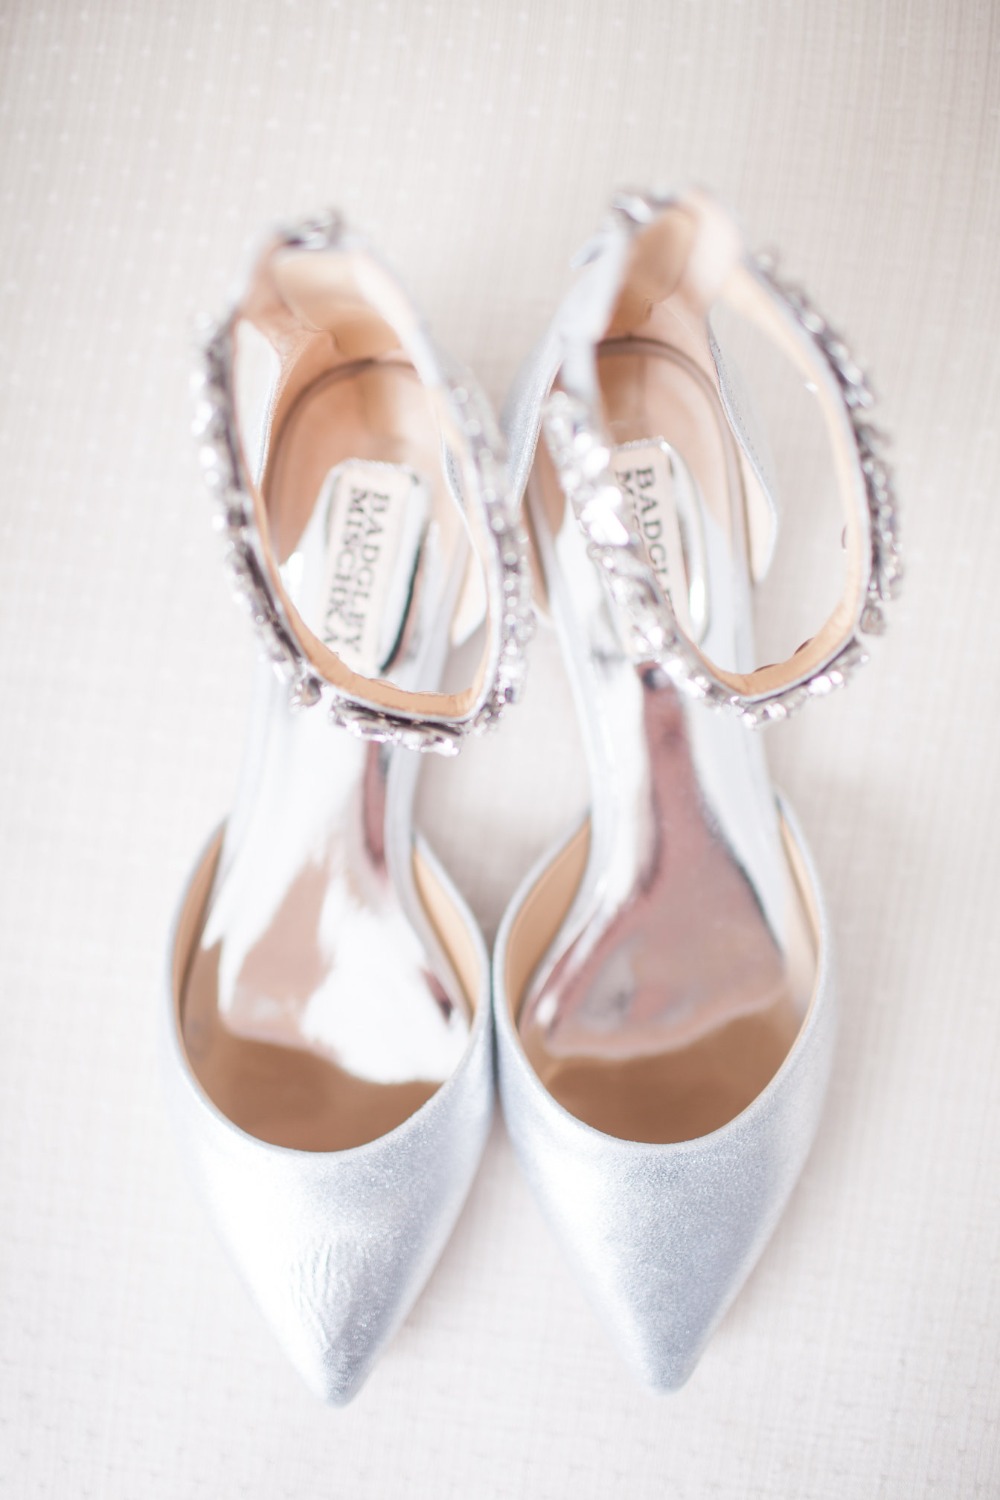 white and glittery wedding shoes